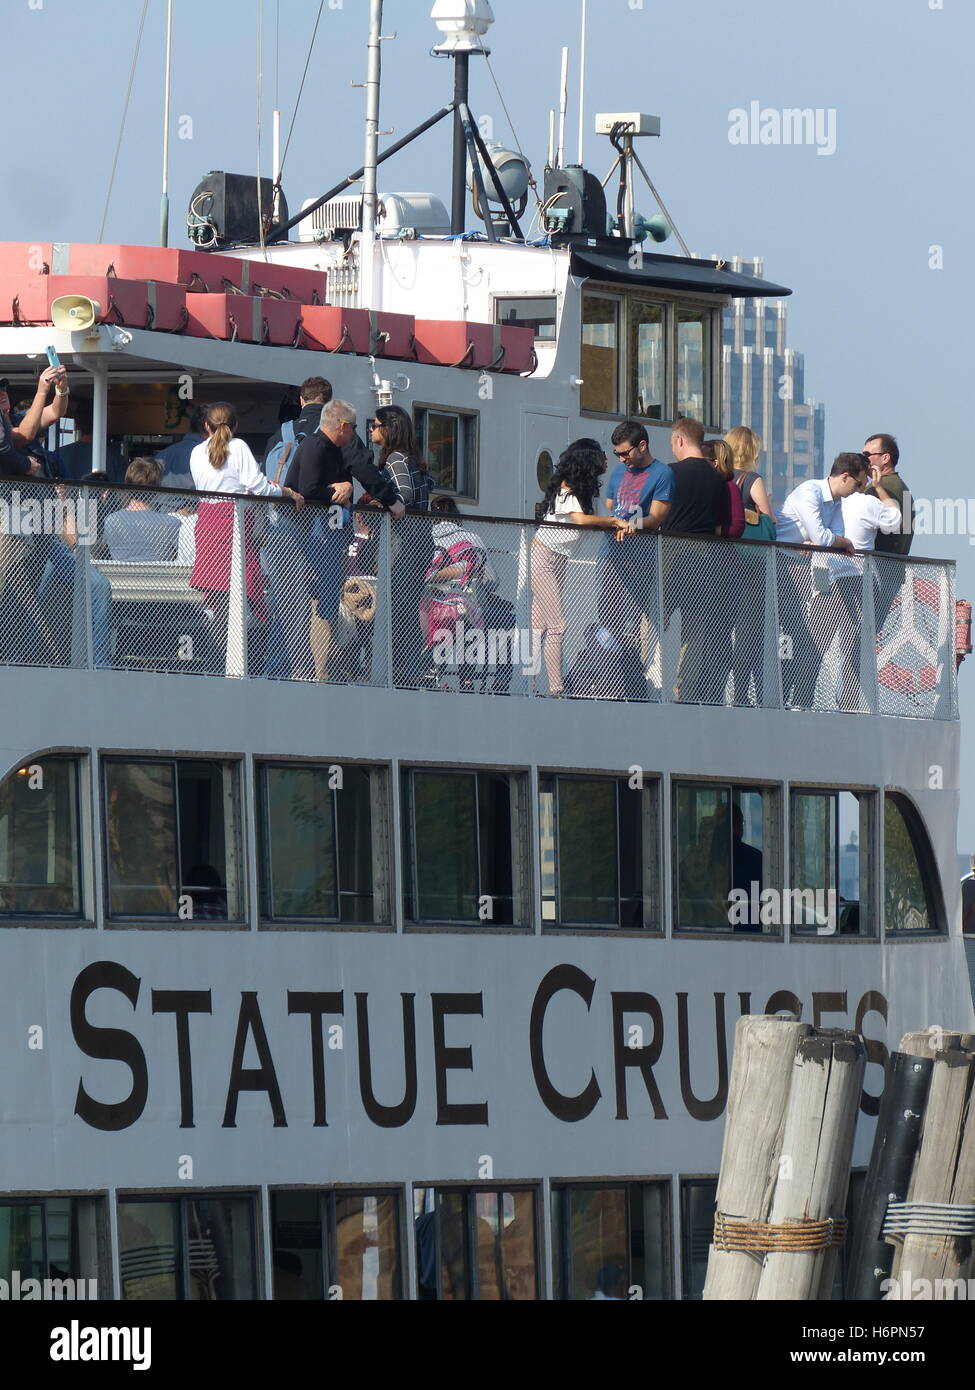 Statue of Liberty Ferry crowded with tourists Stock Photo